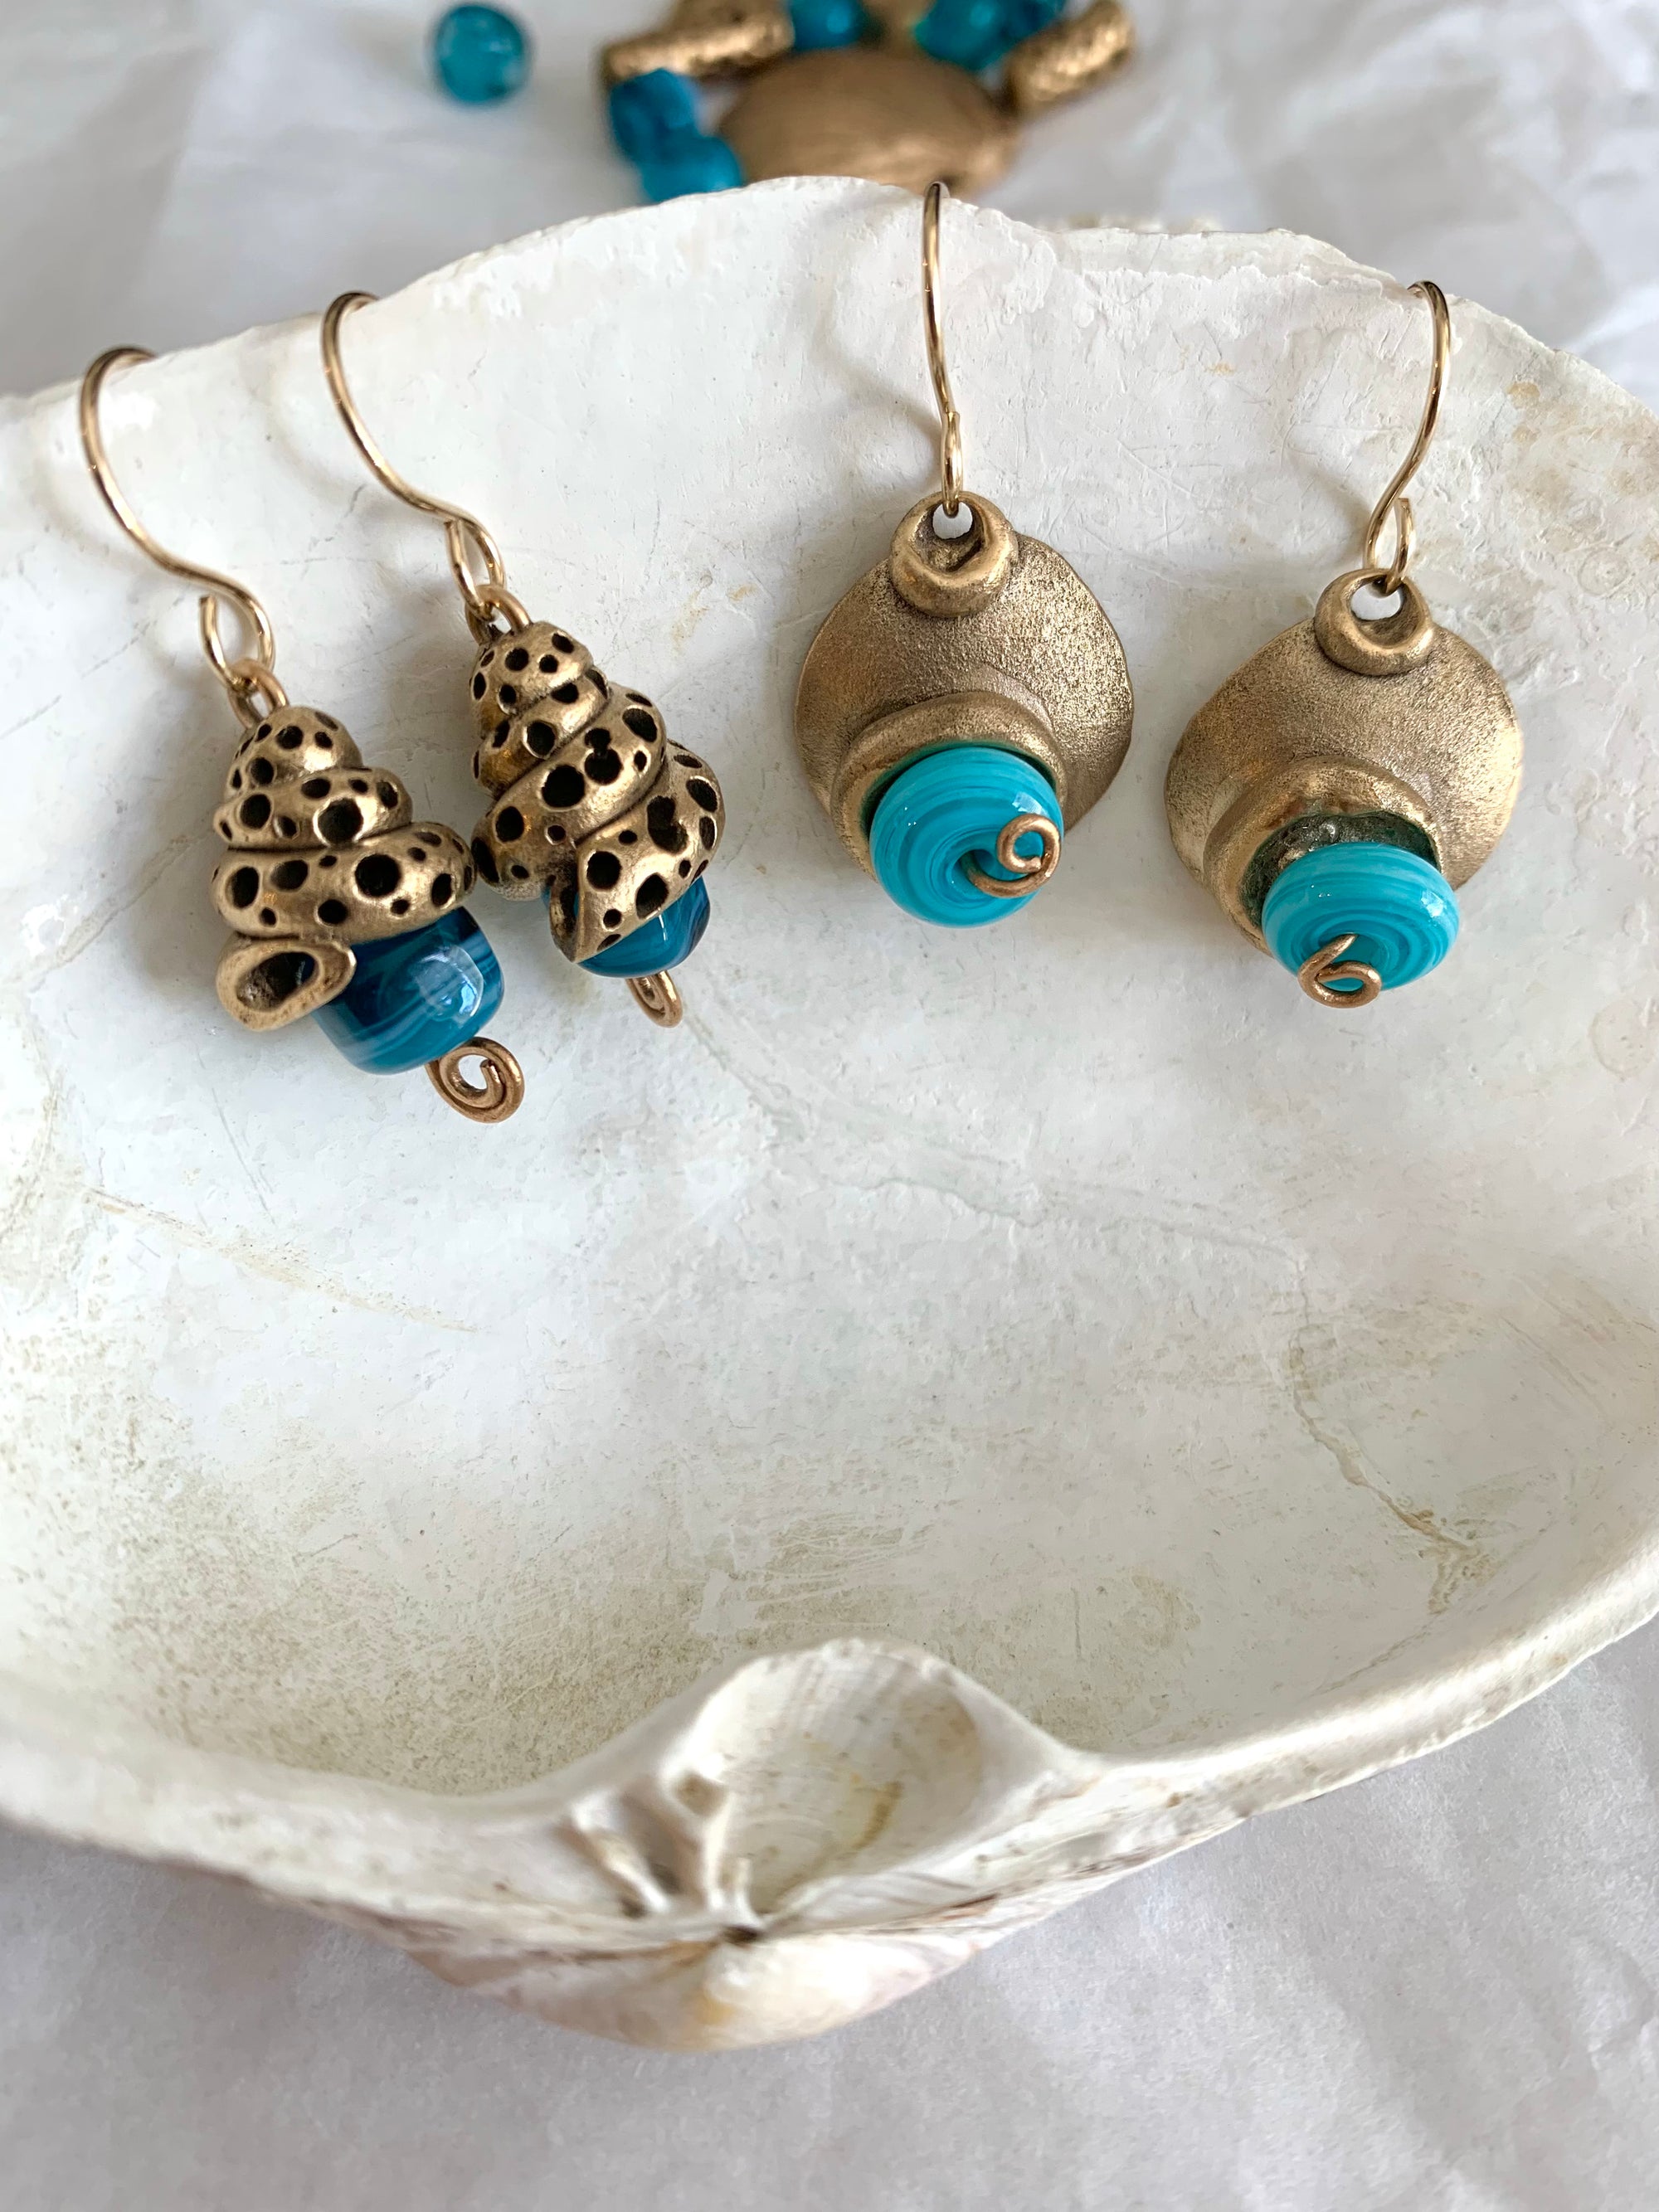 Earrings made from bronze and blue glass beads